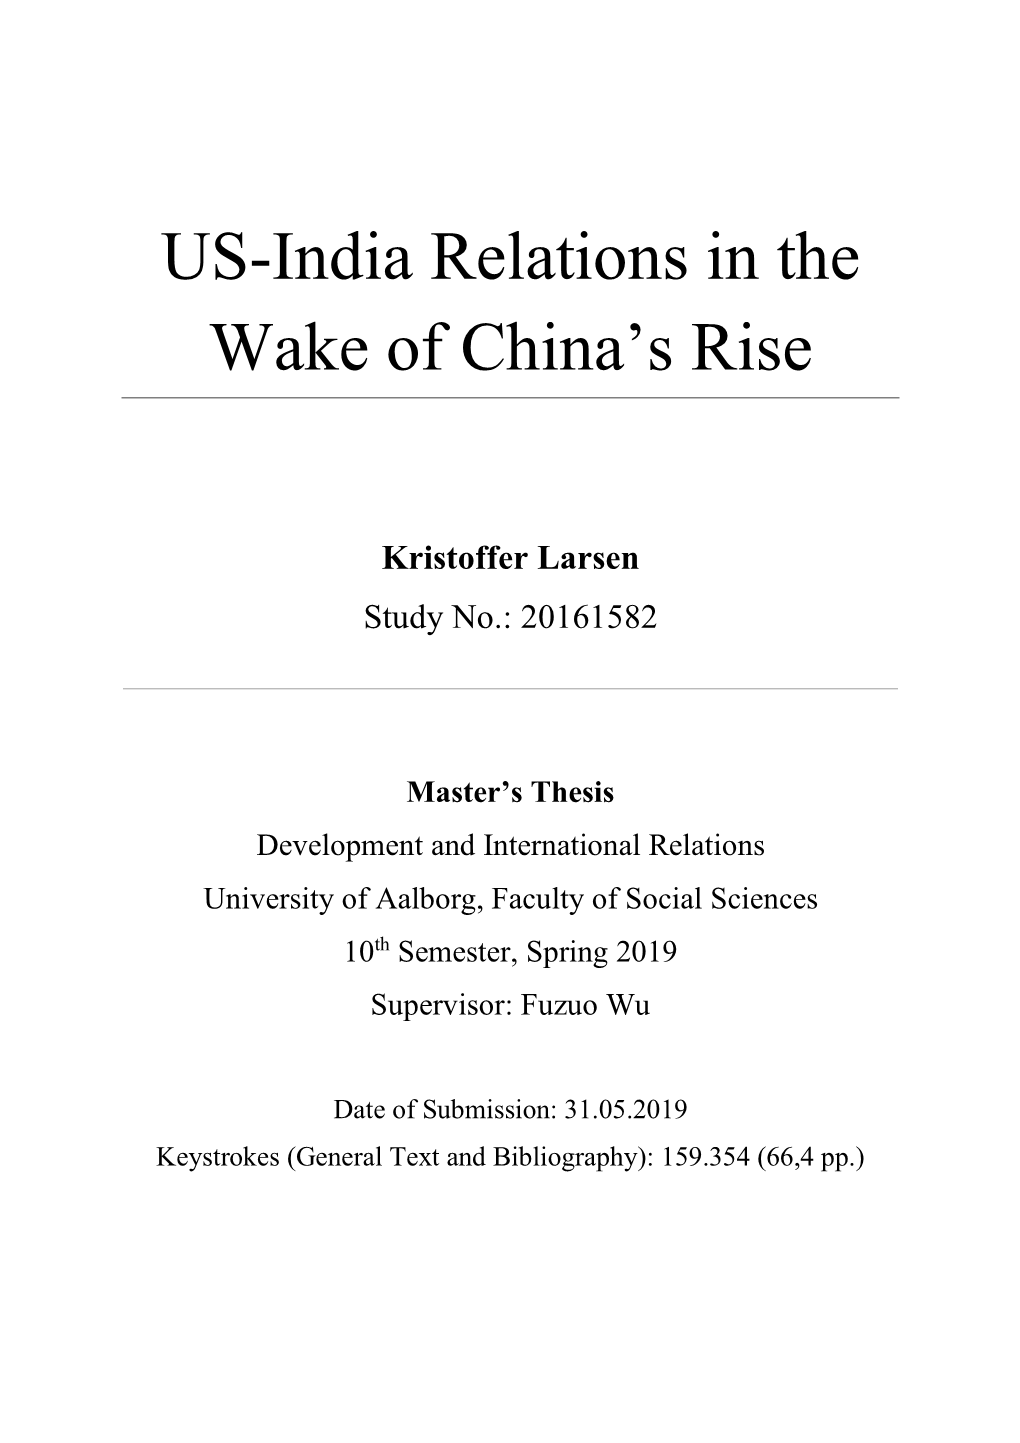 US-India Relations in the Wake of China's Rise